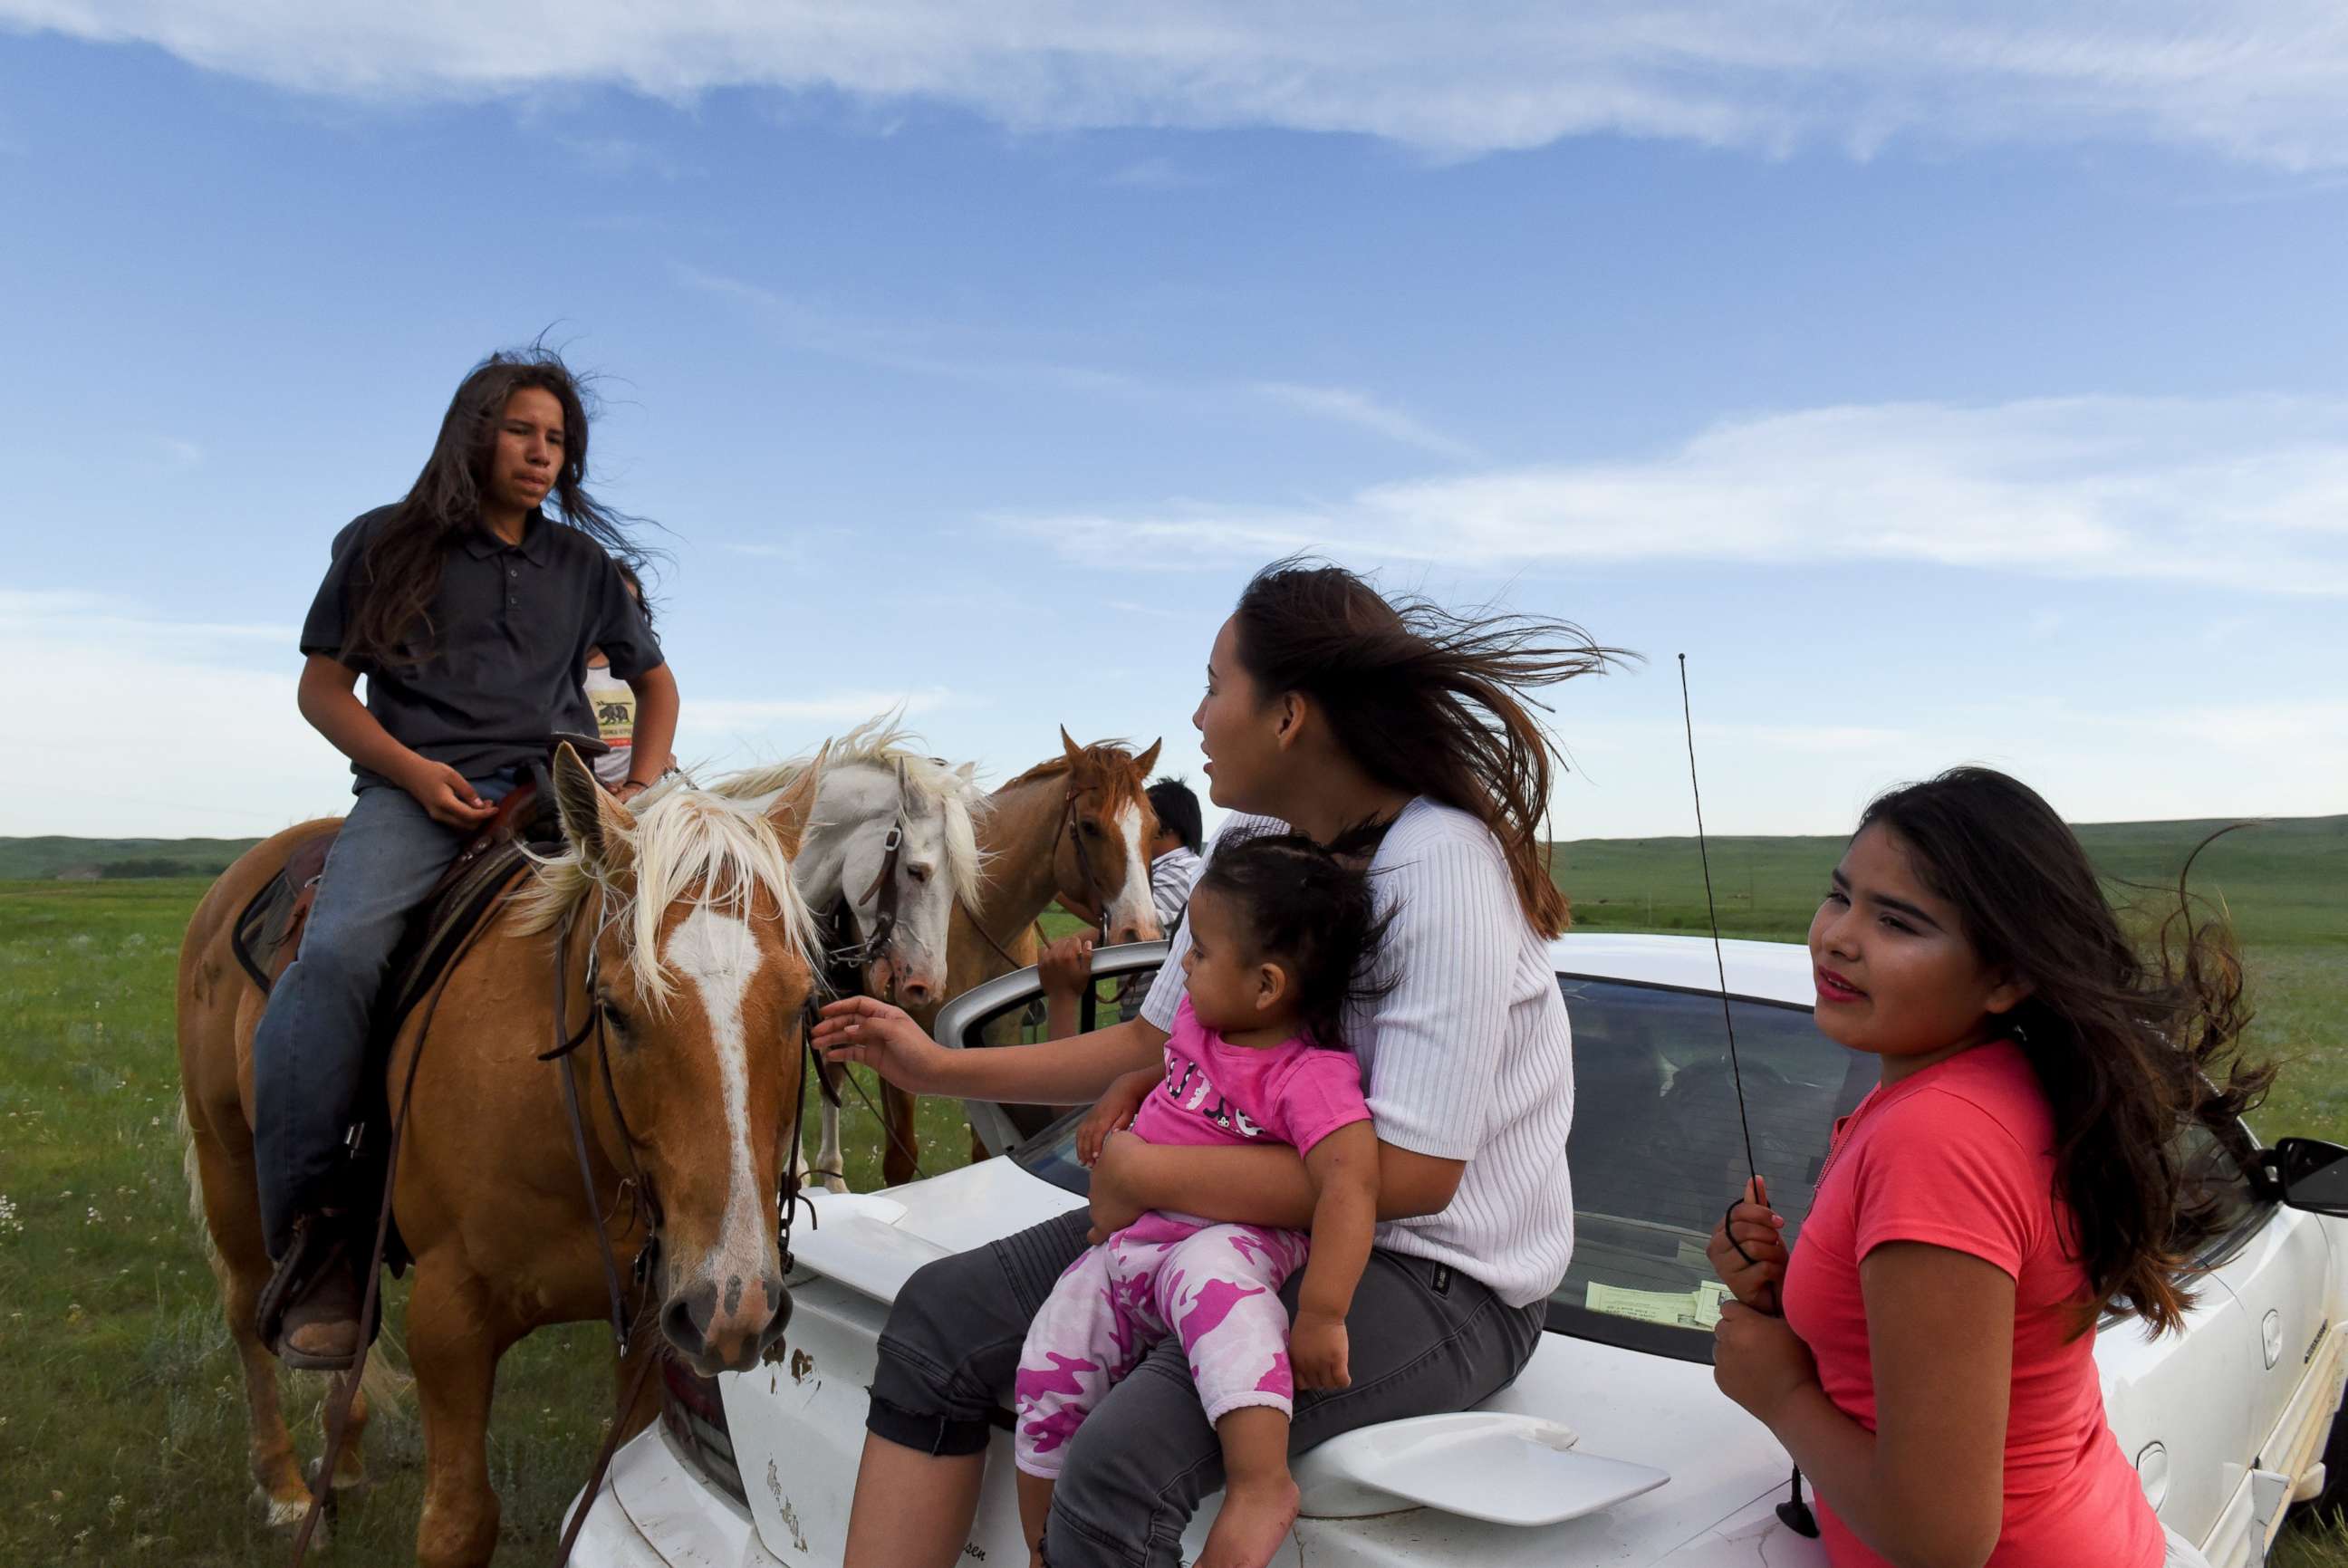 PHOTO: Angel Rose Lookinghorse, sitting with her younger cousins, Linda Lookinghorse and Maryann Lara, as she speaks to her brother, Jayden Lookinghorse, on horseback, at the Cheyenne River Reservation in Green Grass, South Dakota, May 31, 2018. 